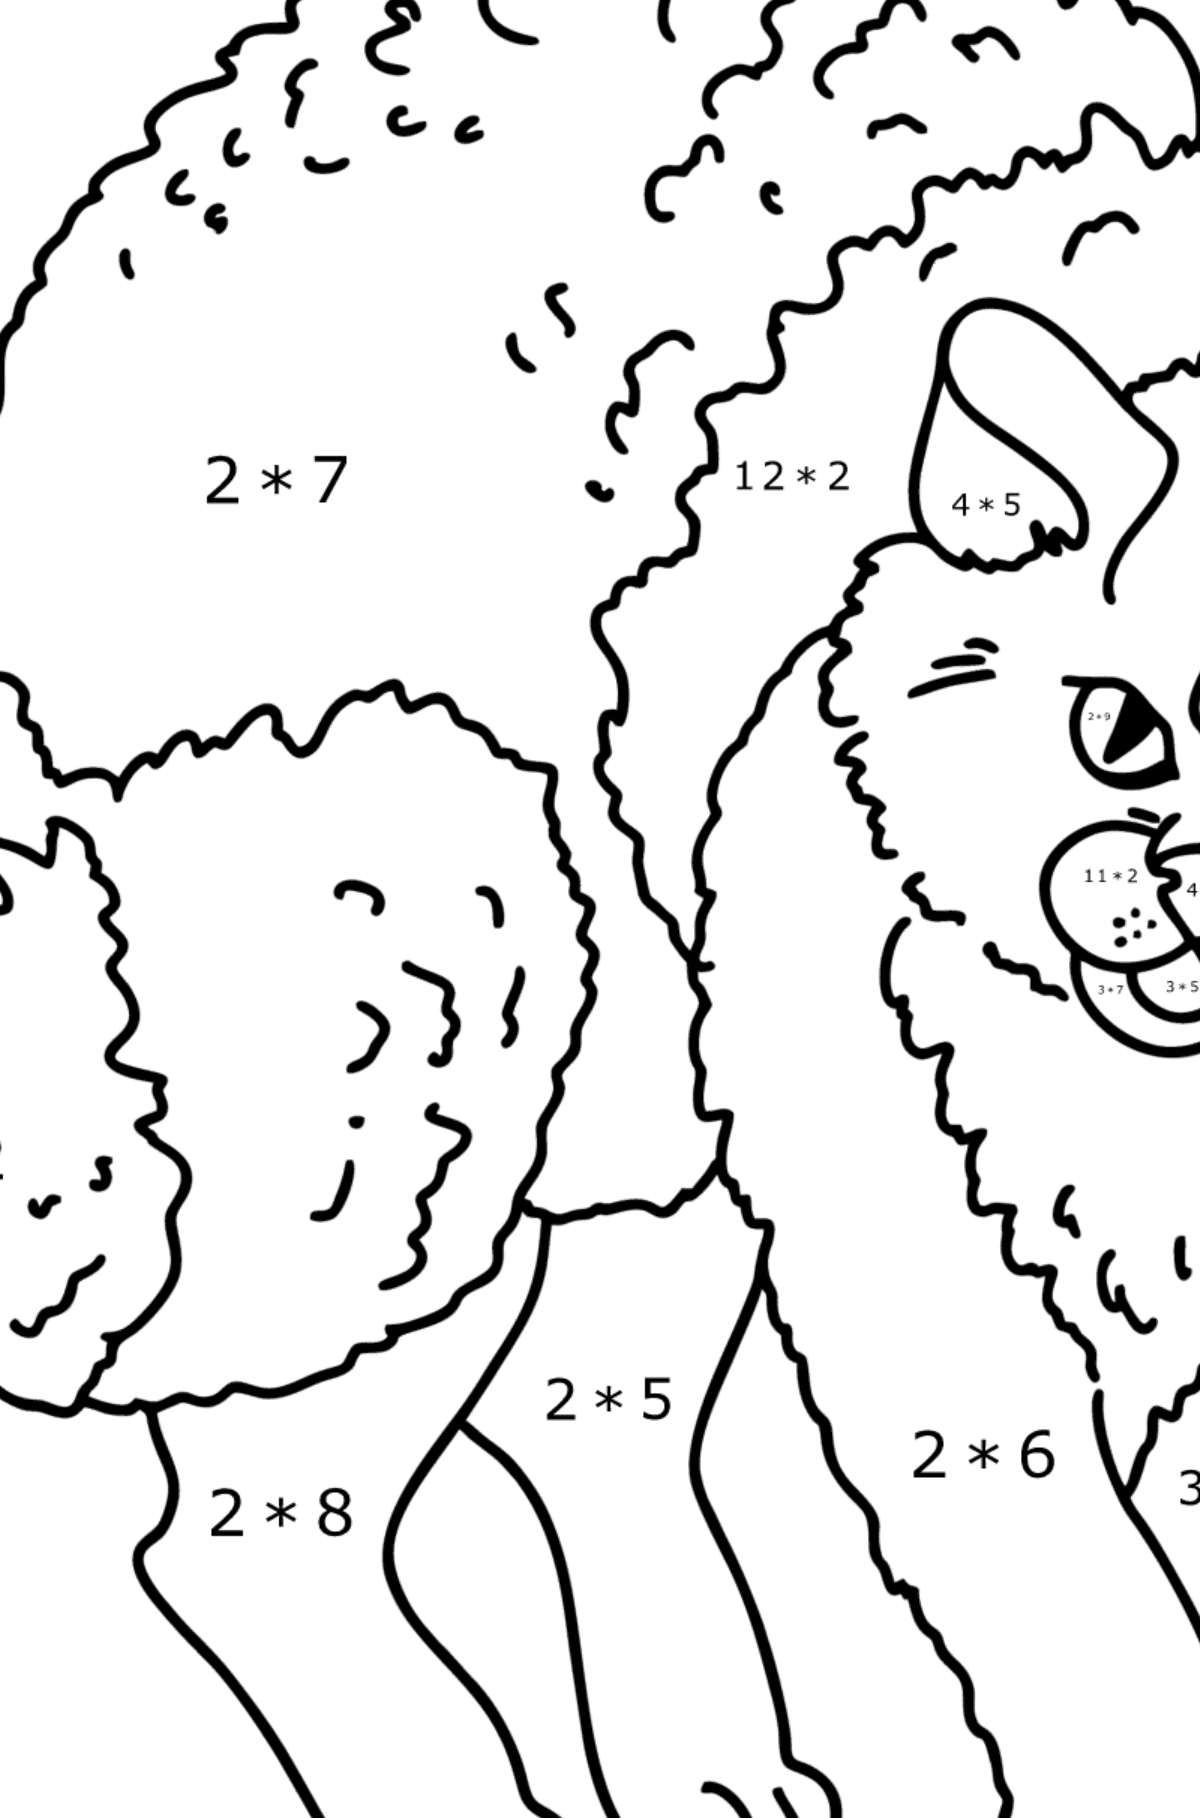 Grumpy Cat coloring page - Math Coloring - Multiplication for Kids